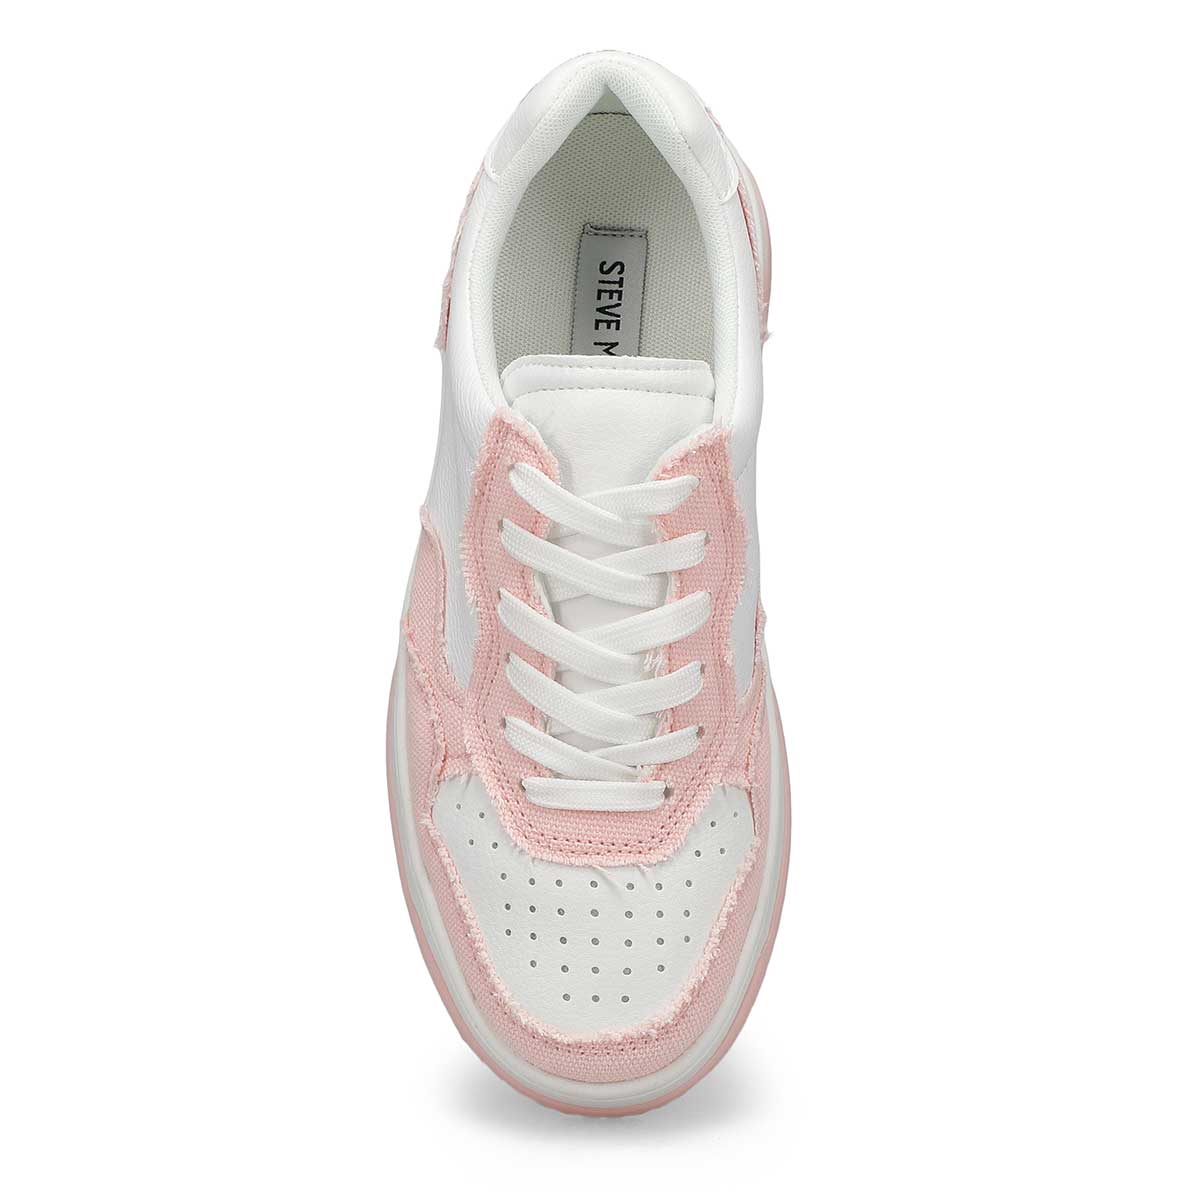 Womens Brynlee Lace Up Sneaker - White/Pink